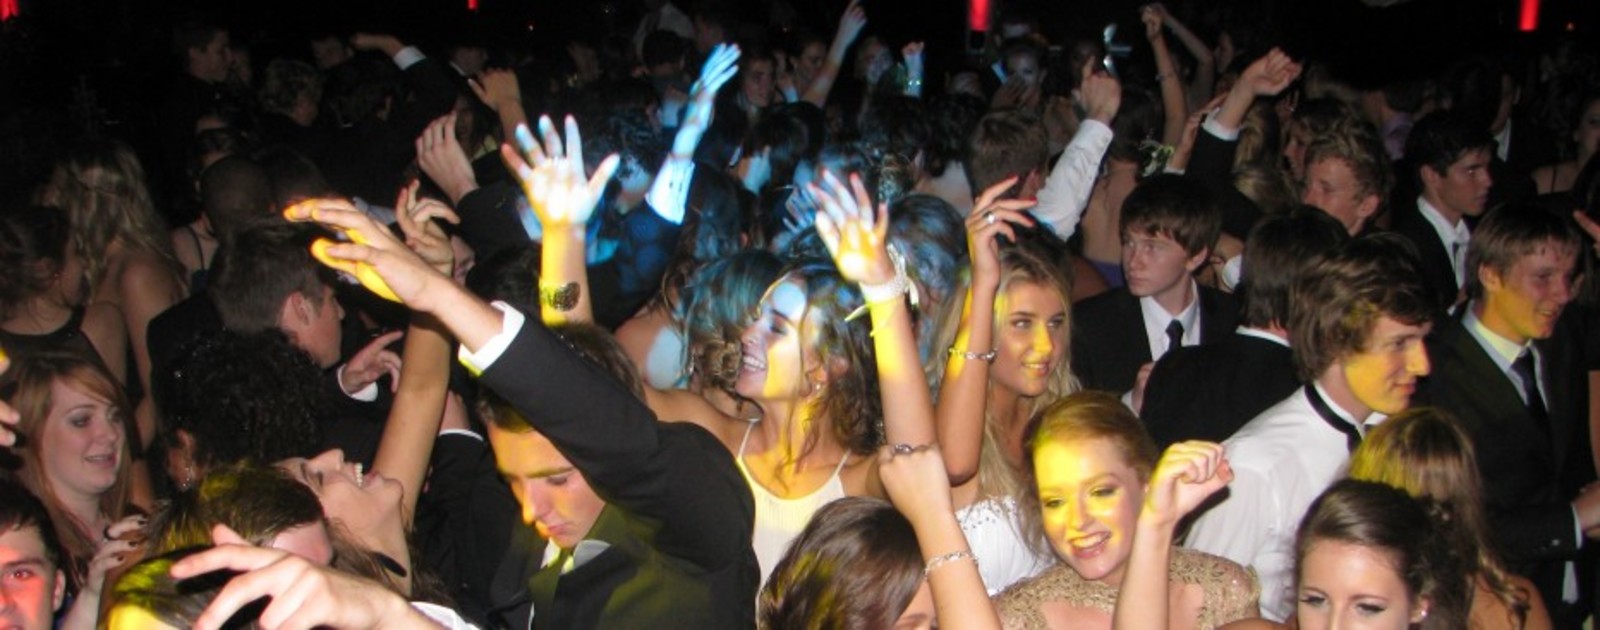 auckland_dj_hire_for_all_events_and_parties_you_need and school ball.jpg